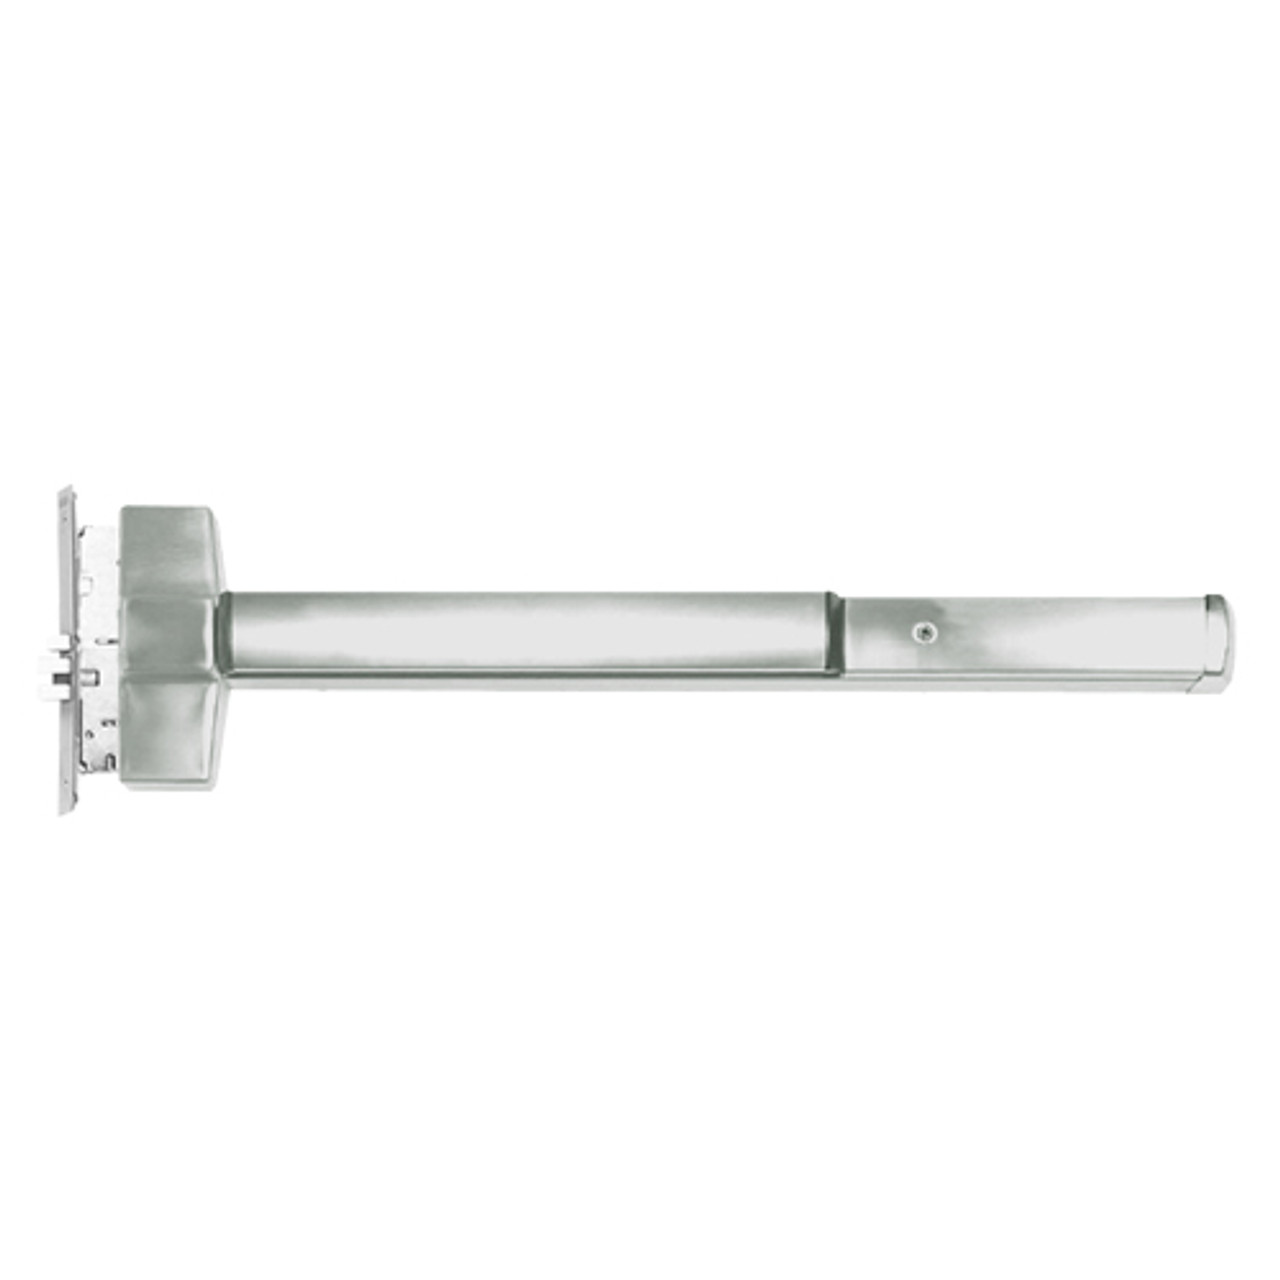 ED5600TD-619-W048-LHR Corbin ED5600 Series Non Fire Rated Mortise Exit Device with Delayed Egress in Satin Nickel Finish